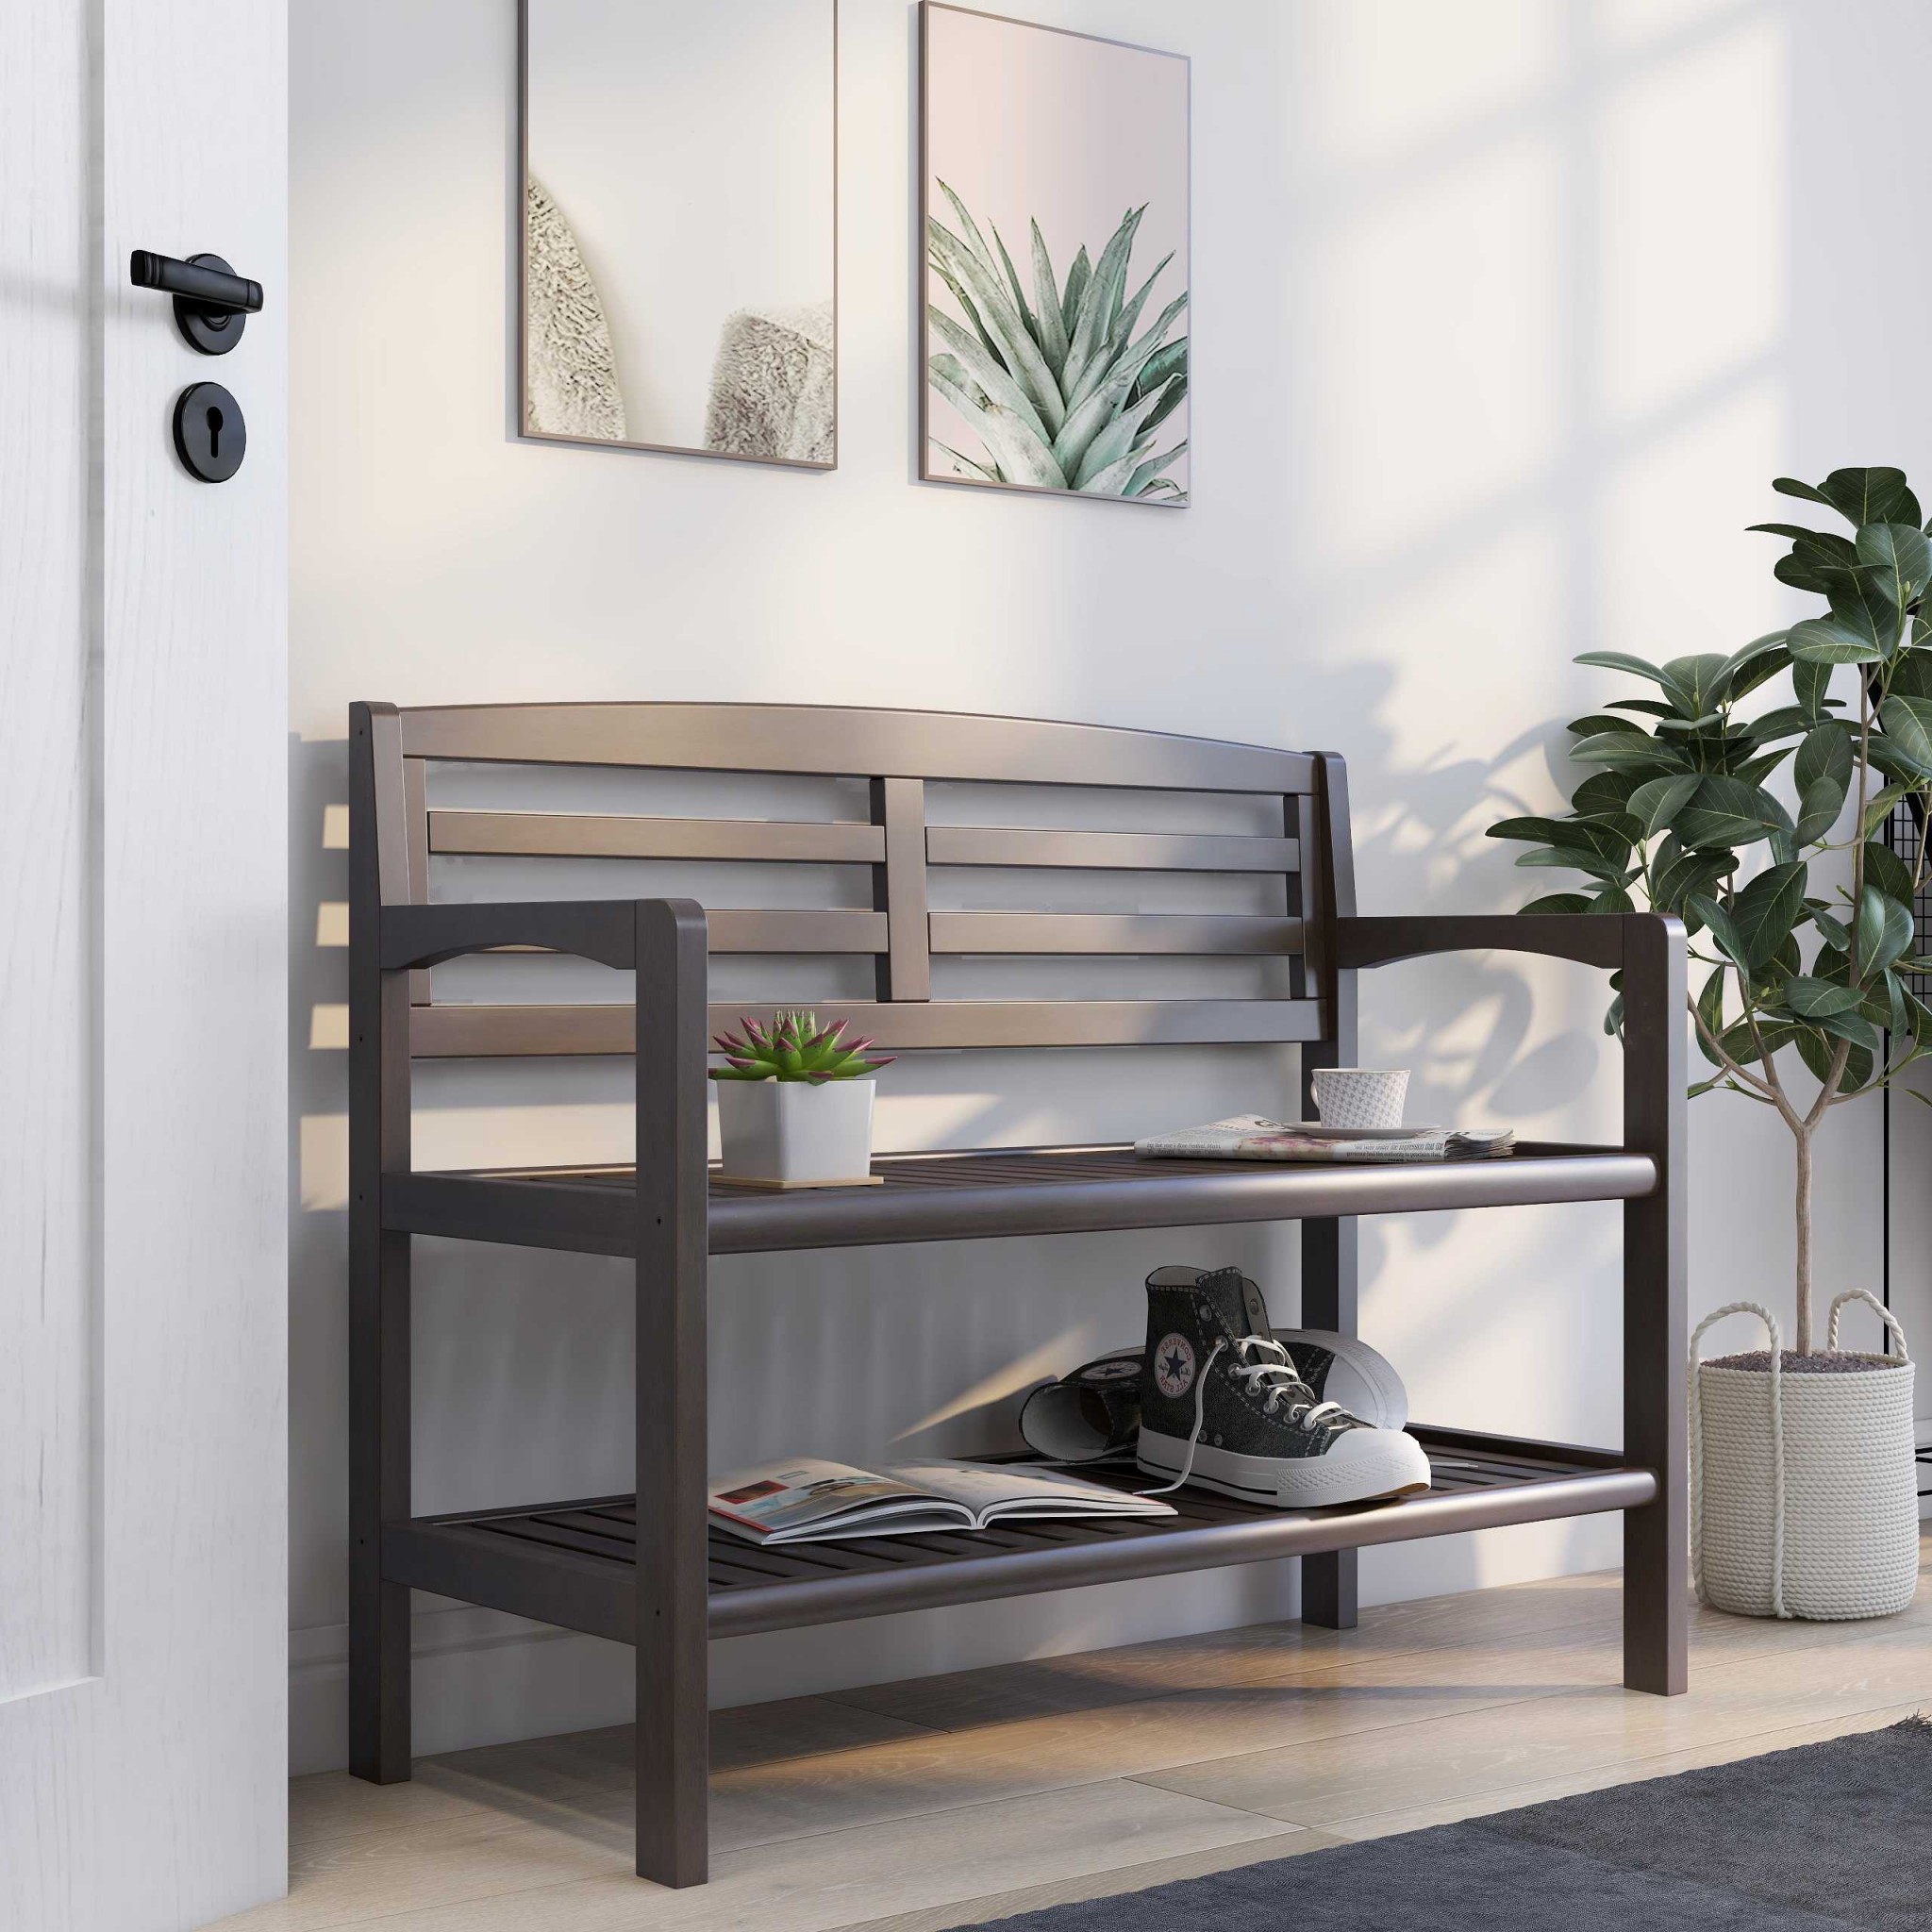 Rectangular Wood Bench with Back and Shelf in Espresso